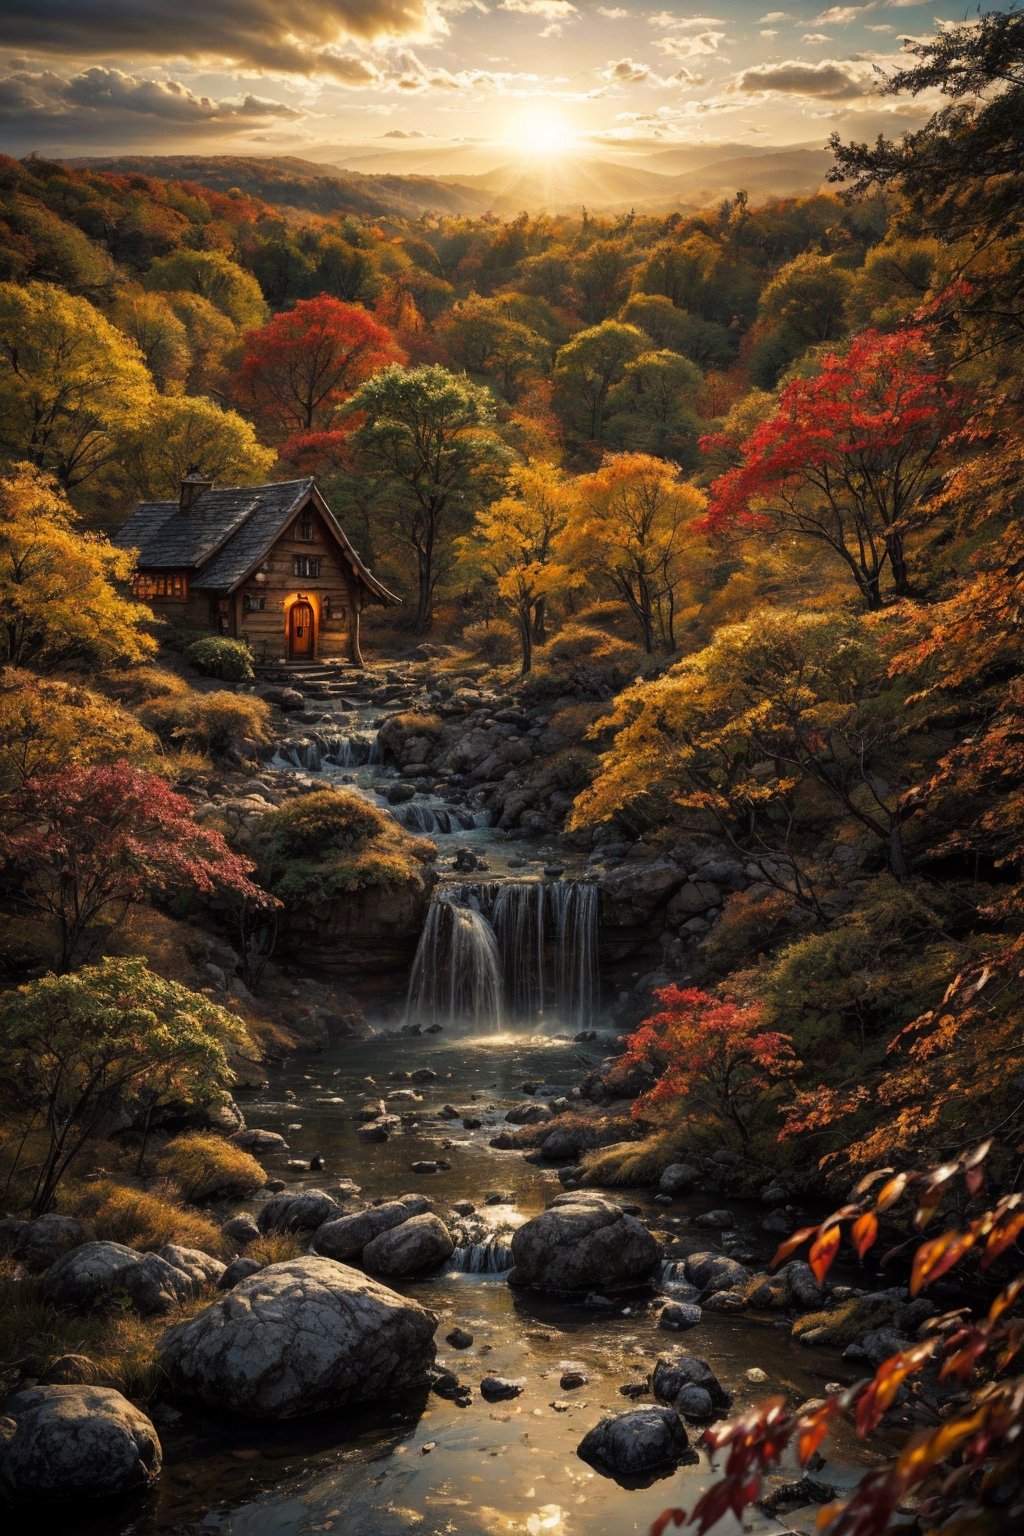 "Generate an enchanting and award-winning photograph that transports viewers to a magical world inhabited by fairies. This world is set within a lush autumn forest, characterized by its vibrant colors and enchanting atmosphere.

The scene should be a testament to the beauty of nature, with fairy houses crafted from wood nestled among the trees. These houses should be whimsical and charming, seamlessly blending with the forest's natural surroundings.

Autumn leaves should blanket the forest floor, with warm and rich hues of red, orange, and gold adorning the landscape. The enchanting atmosphere should be illuminated by the soft, golden light of the autumn sun, casting a warm and inviting glow over the entire scene.

A cascading waterfall should be a central feature, adding both visual and auditory charm to the composition. The waterfall should flow gracefully, with crystalline waters that shimmer and reflect the surrounding colors.

Amongst the foliage, mushrooms of various sizes and colors should emerge, adding to the fantastical quality of the scene. Fireflies should twinkle in the air, casting a magical, luminous aura over the forest.

Introduce tiny, small dragon pets, each unique in its design and appearance, perched on branches or hovering nearby. These creatures should exude a sense of wonder and companionship.

Dwarfs, with their distinctive earthy presence, should be subtly integrated into the scene, adding an element of intrigue and discovery for viewers.

Implement cinematic colors that enhance the enchanting atmosphere, with vibrant and harmonious palettes that evoke the magic of the forest. Utilize dramatic illumination to cast intricate shadows and highlights, creating depth and dimension.

This photograph should be a masterpiece, capturing the whimsy and wonder of a magical fairy world within an autumn forest. The high-resolution 8k format should allow viewers to immerse themselves in the smallest details of this captivating scene."